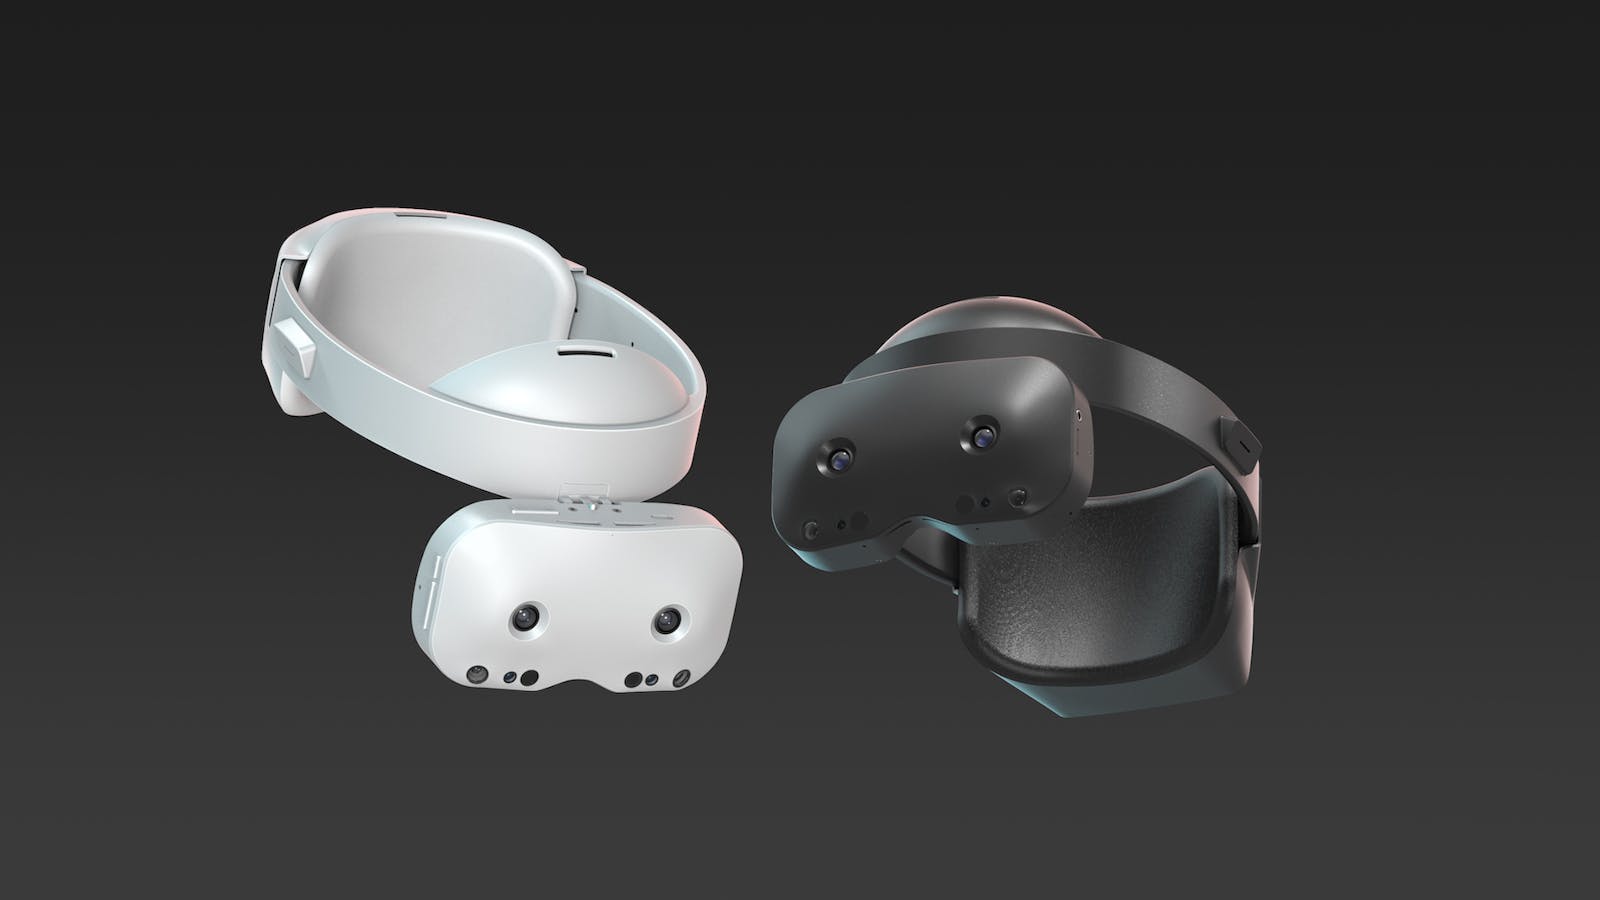 The redesigned Lynx R-1 mixed reality headset. Image by Lynx